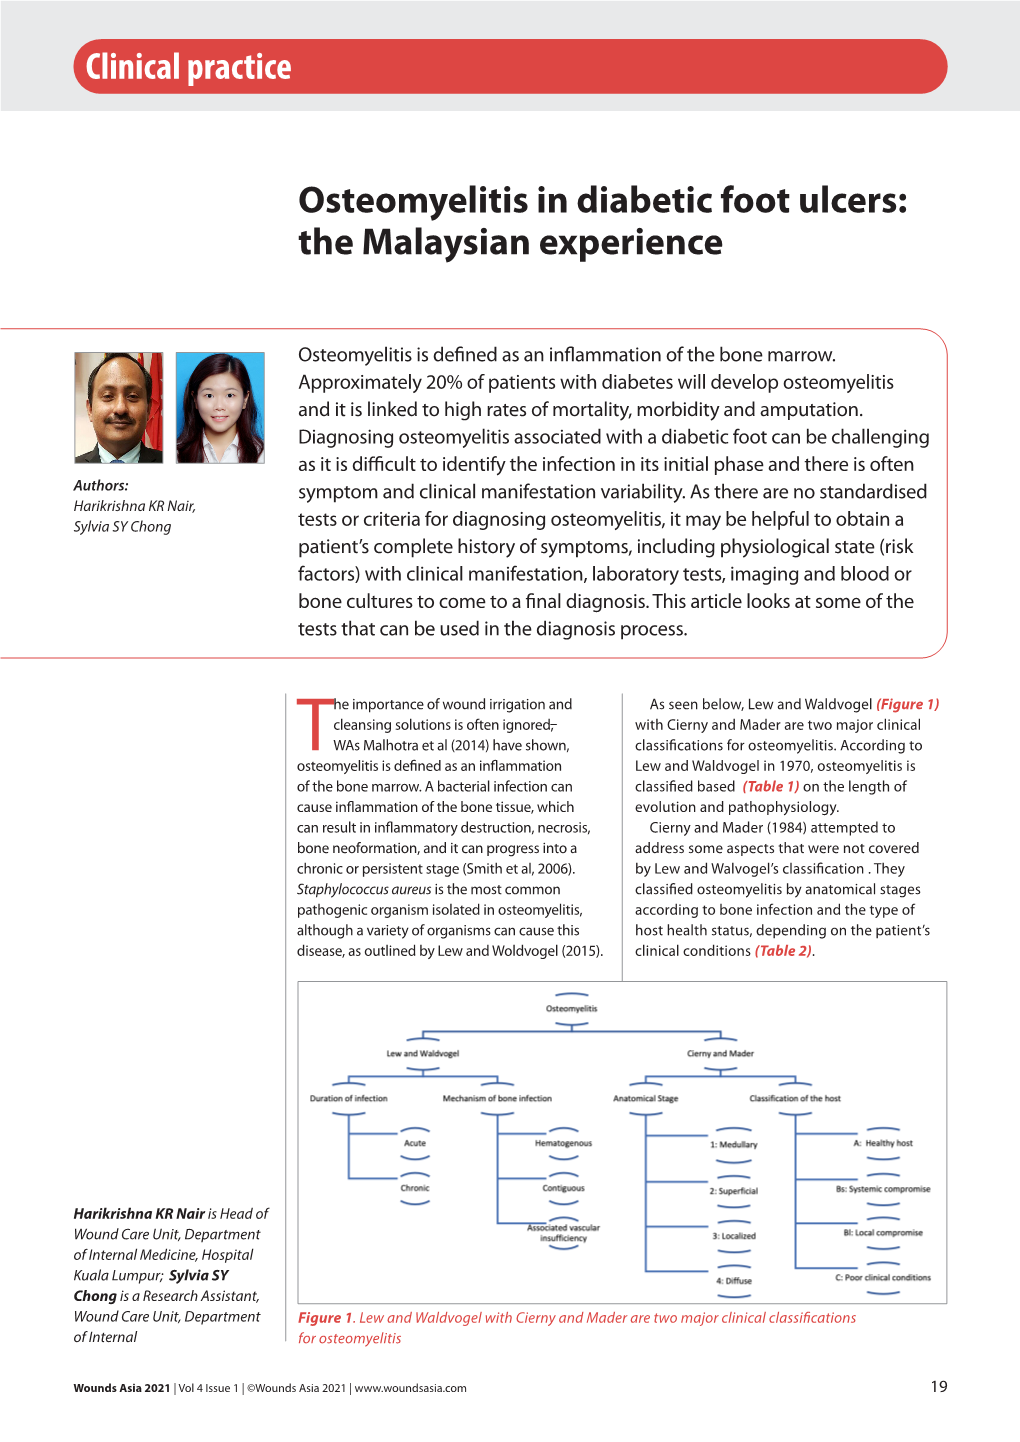 Osteomyelitis in Diabetic Foot Ulcers: the Malaysian Experience